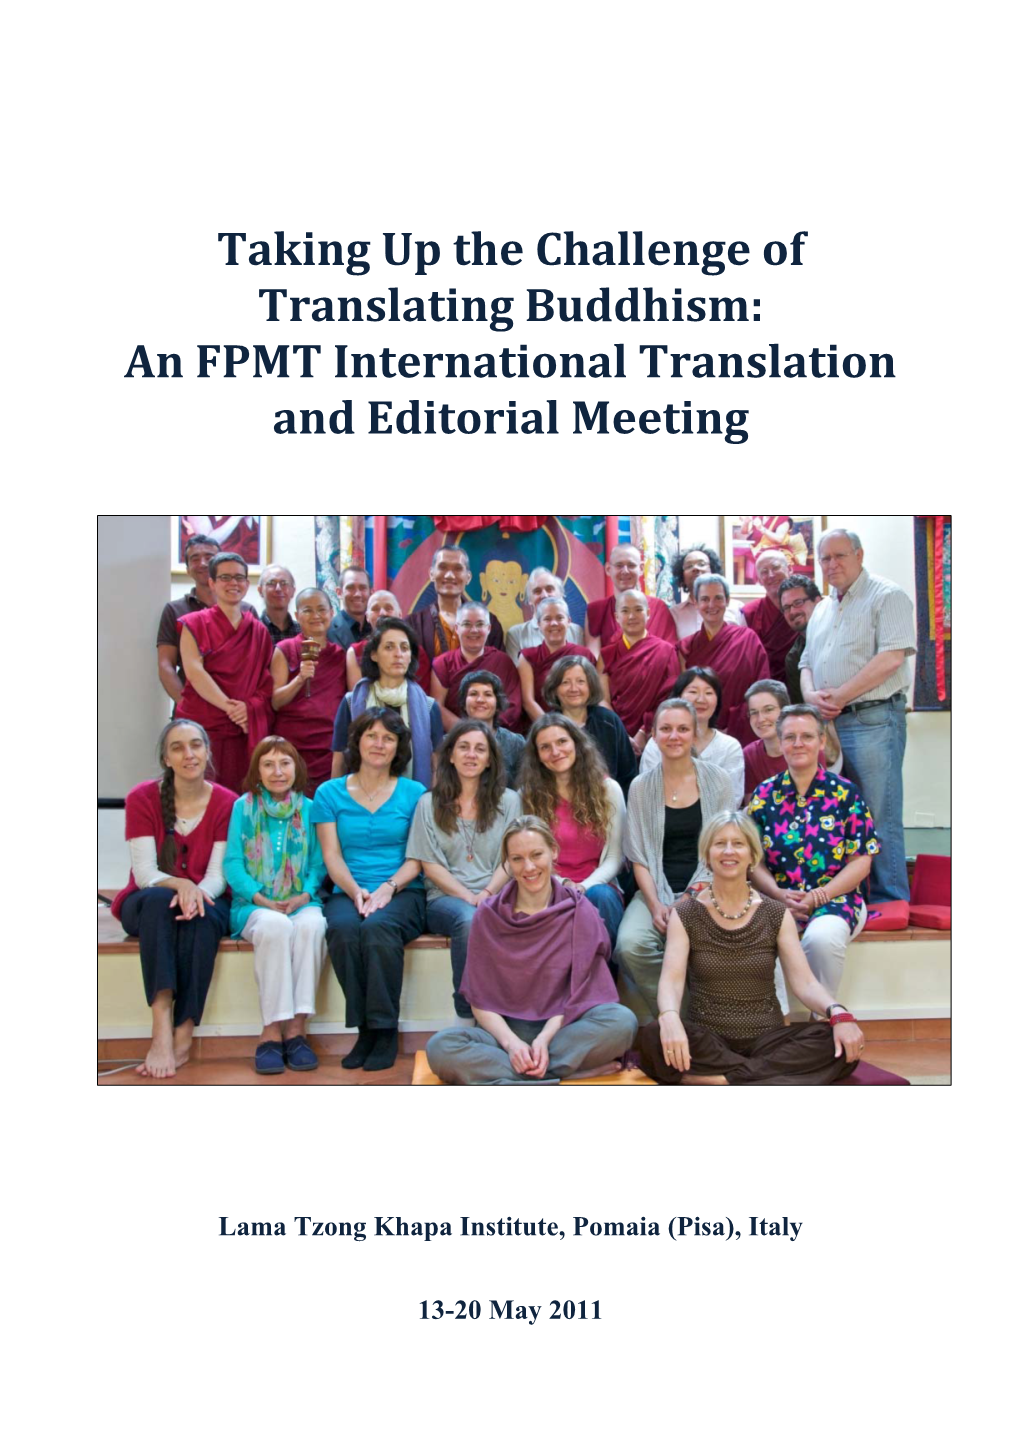 Taking up the Challenge of Translating Buddhism: an FPMT International Translation and Editorial Meeting